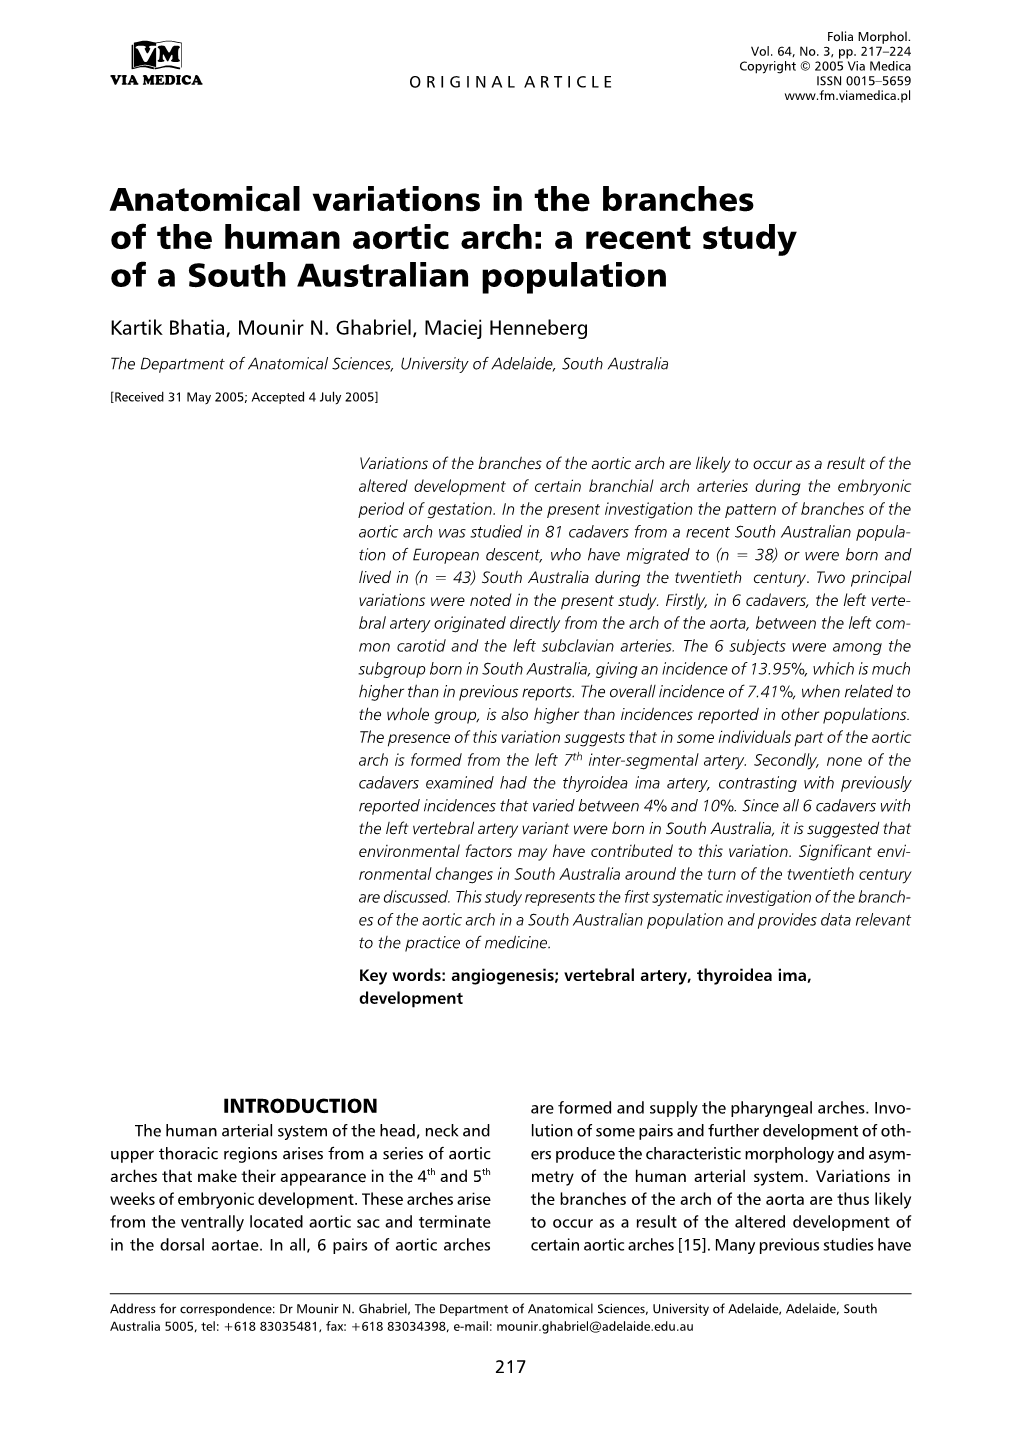 Anatomical Variations in the Branches of the Human Aortic Arch: a Recent Study of a South Australian Population